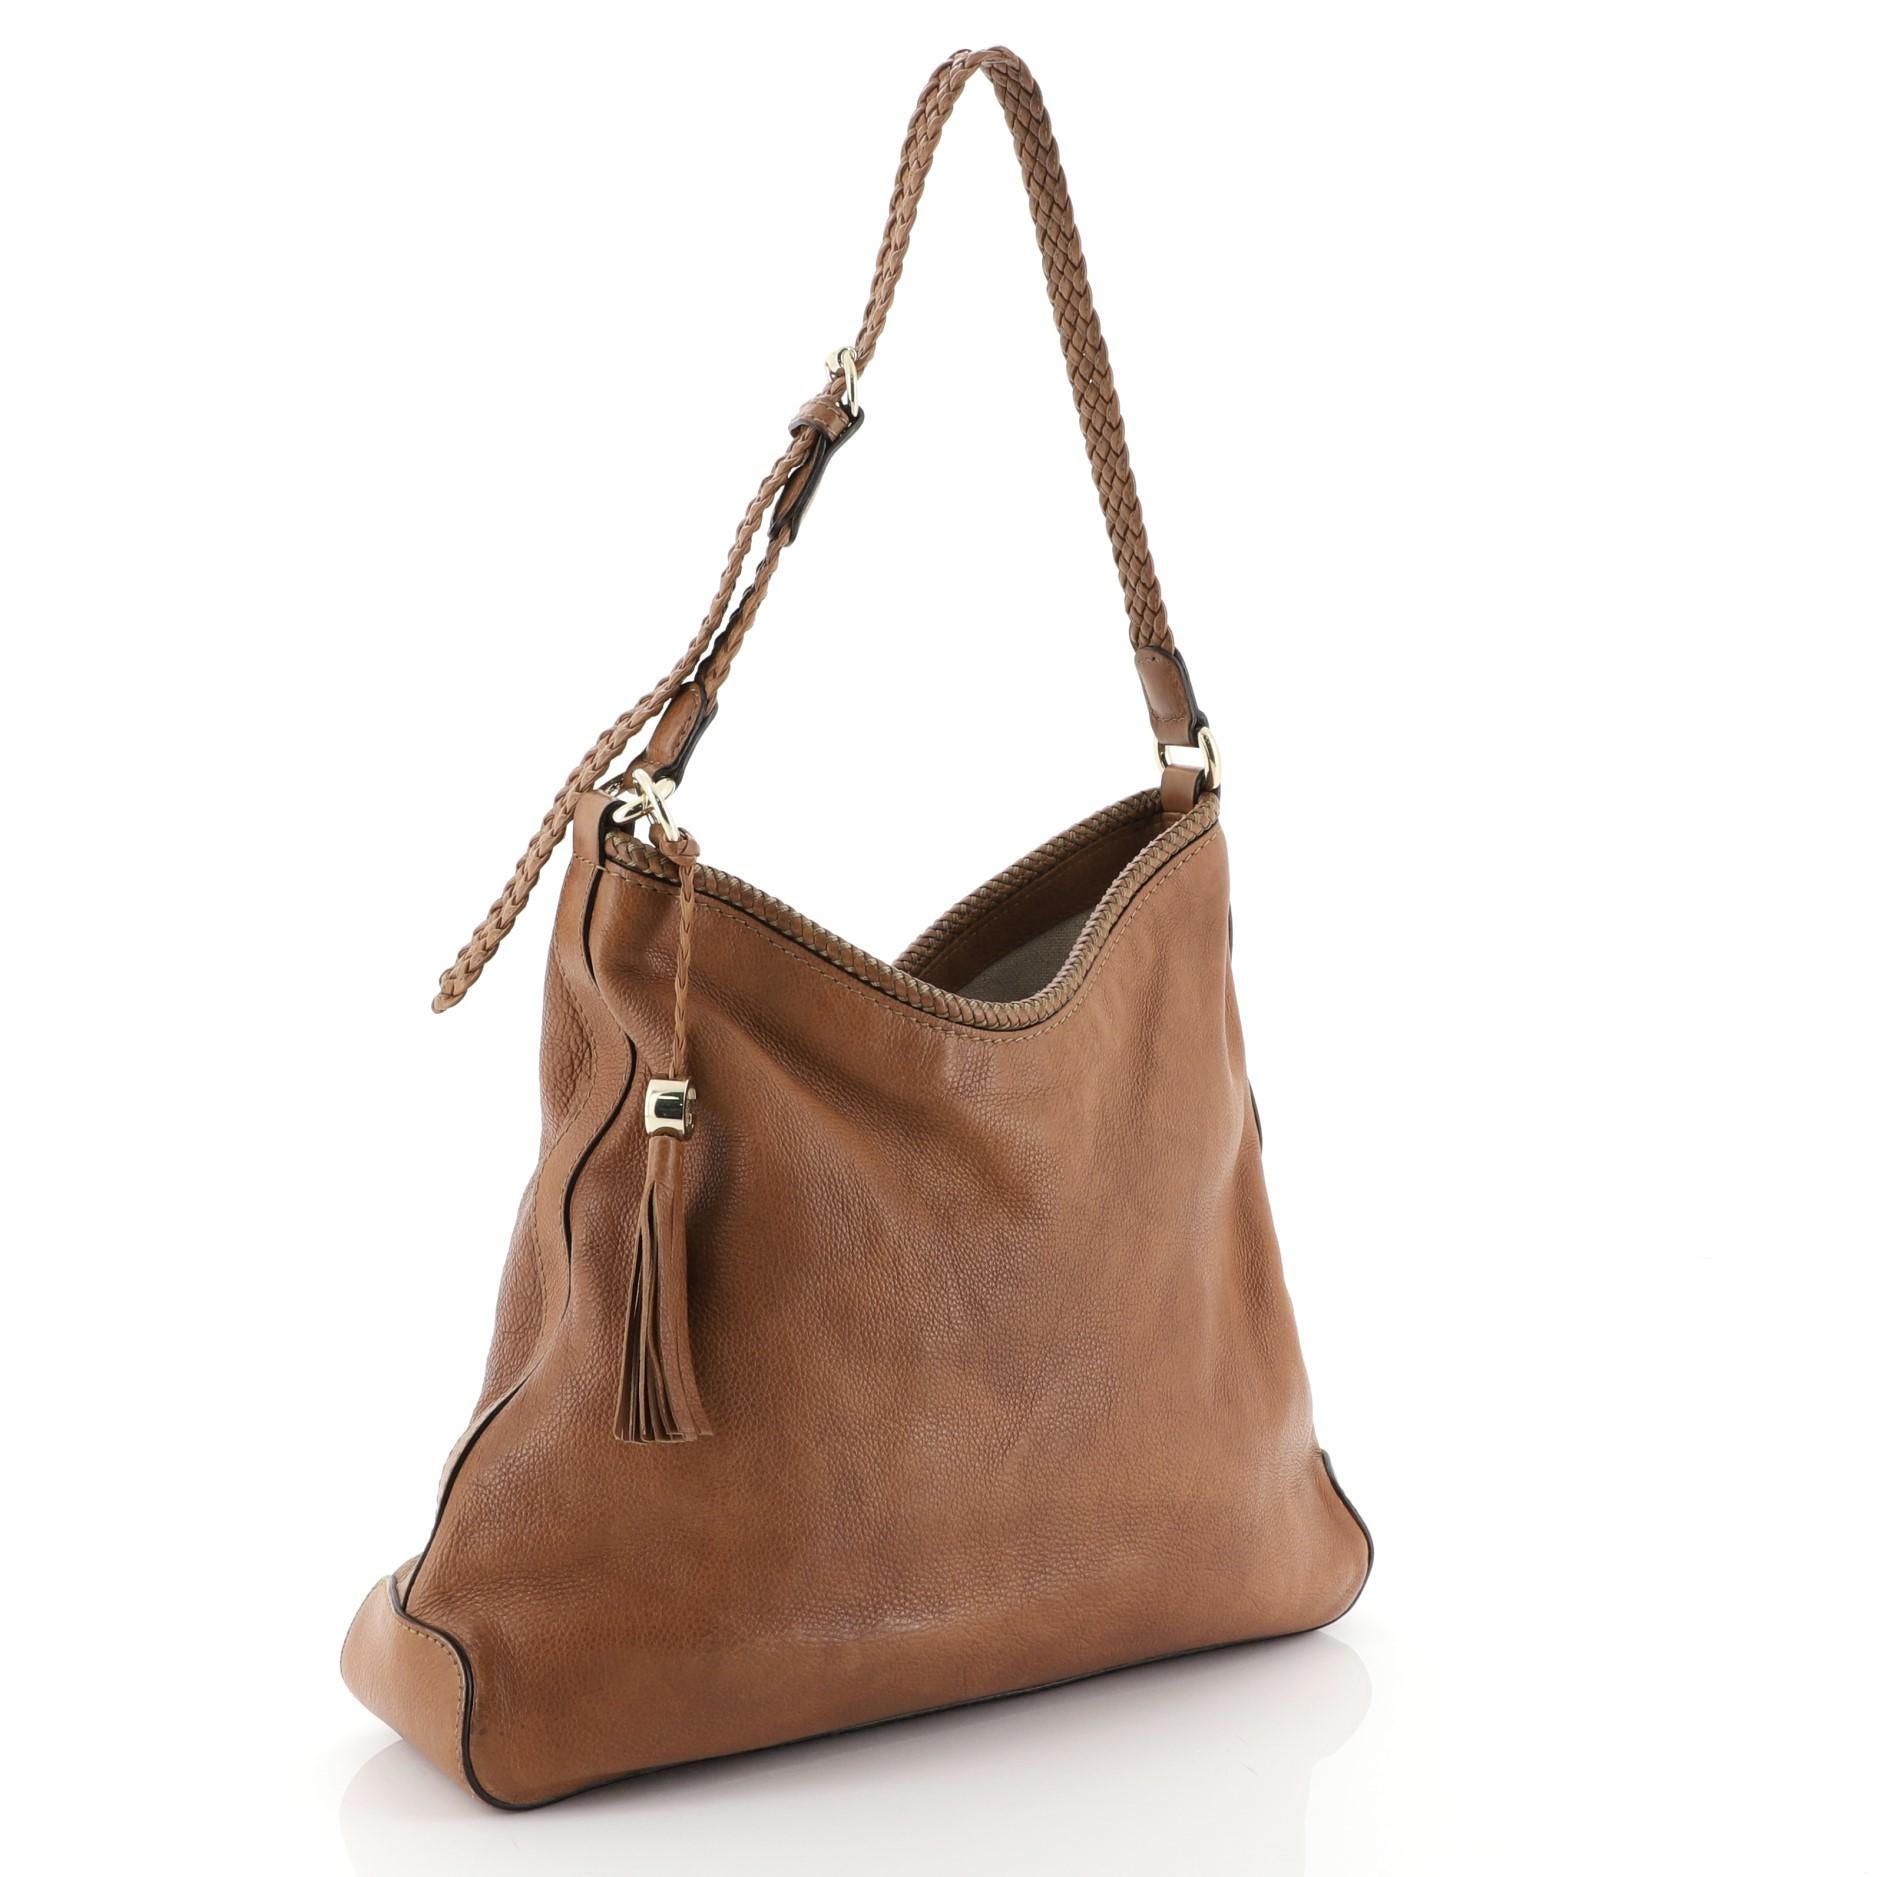 This Gucci Marrakech Hobo Leather Medium, crafted from brown leather with braided leather trims, features a looping shoulder strap, tassel detail, Gucci charms, and gold-tone hardware. Its magnetic snap closure opens to a neutral canvas interior